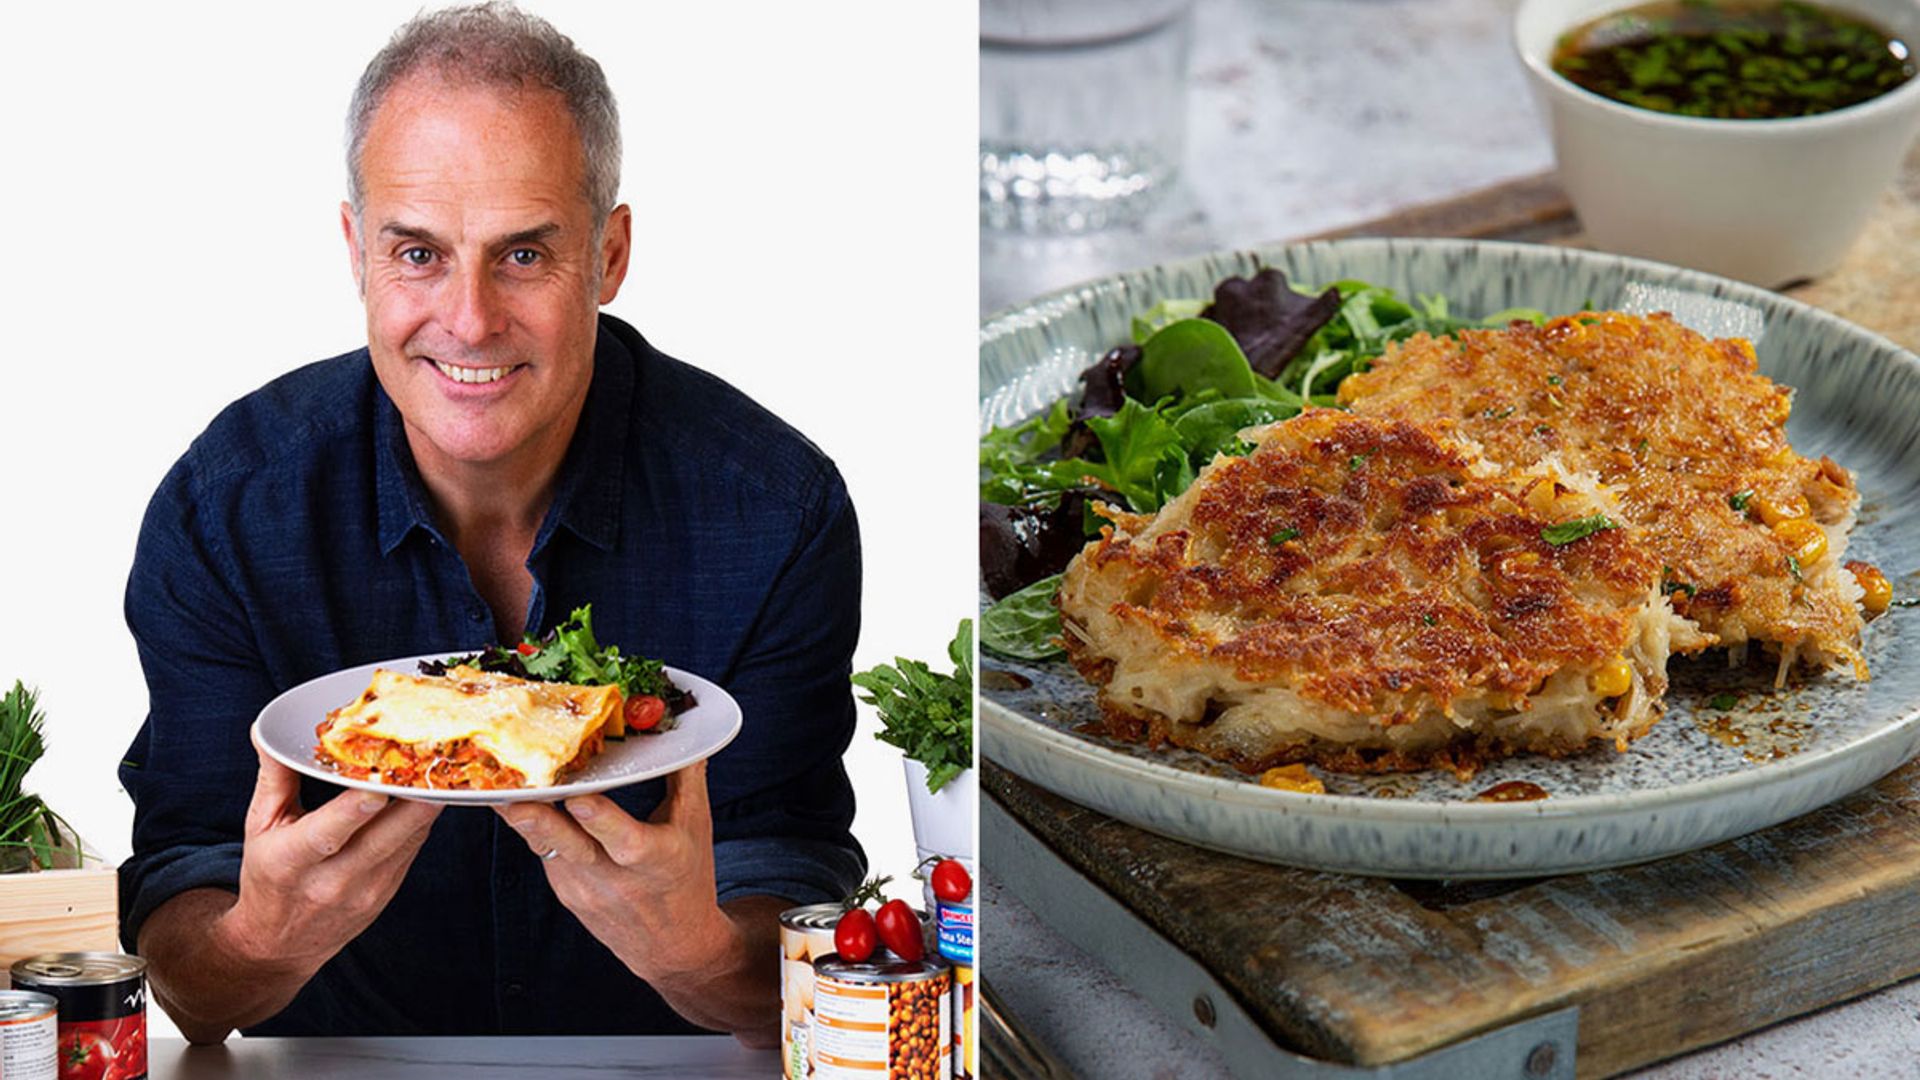 Phil Vickery's kitchen secrets: This Morning chef shares his top canned food recipes for breakfast, lunch and dinner